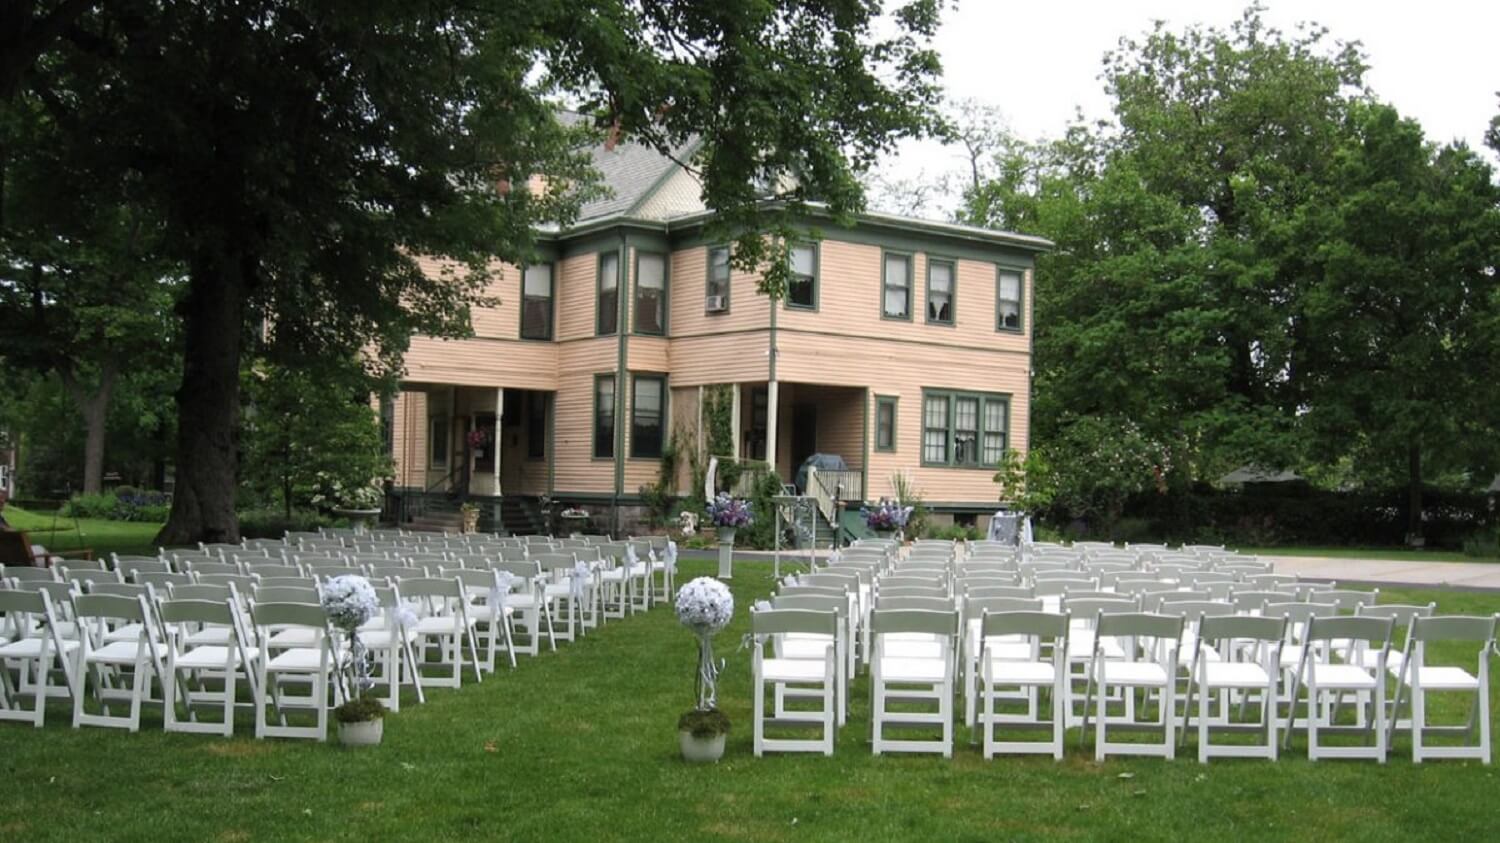 Weddings - Our Lawn Setup for a Reception